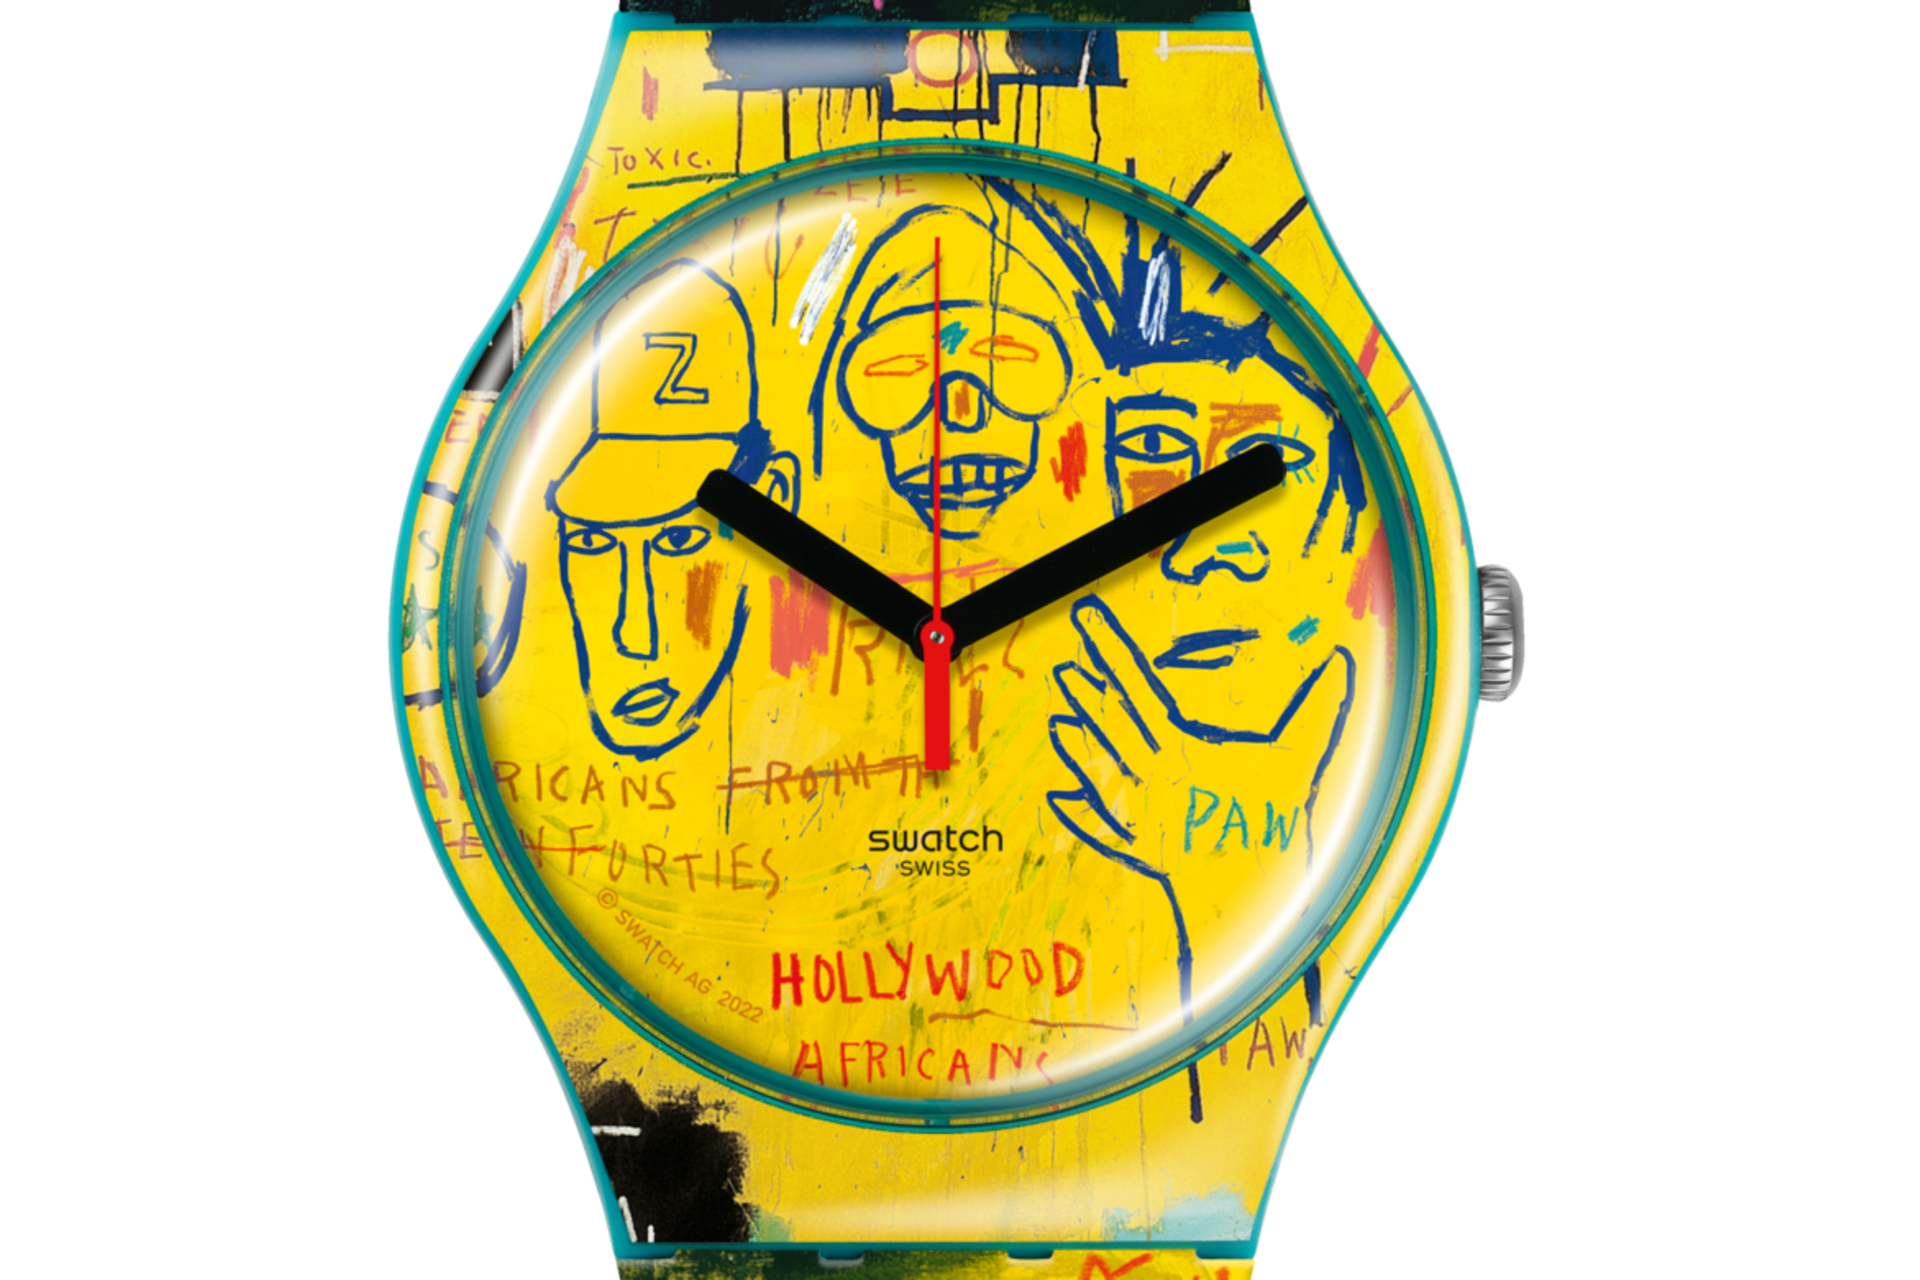 "HOLLYWOOD AFRICANS BY JM BASQUIAT" Gallery Image #2